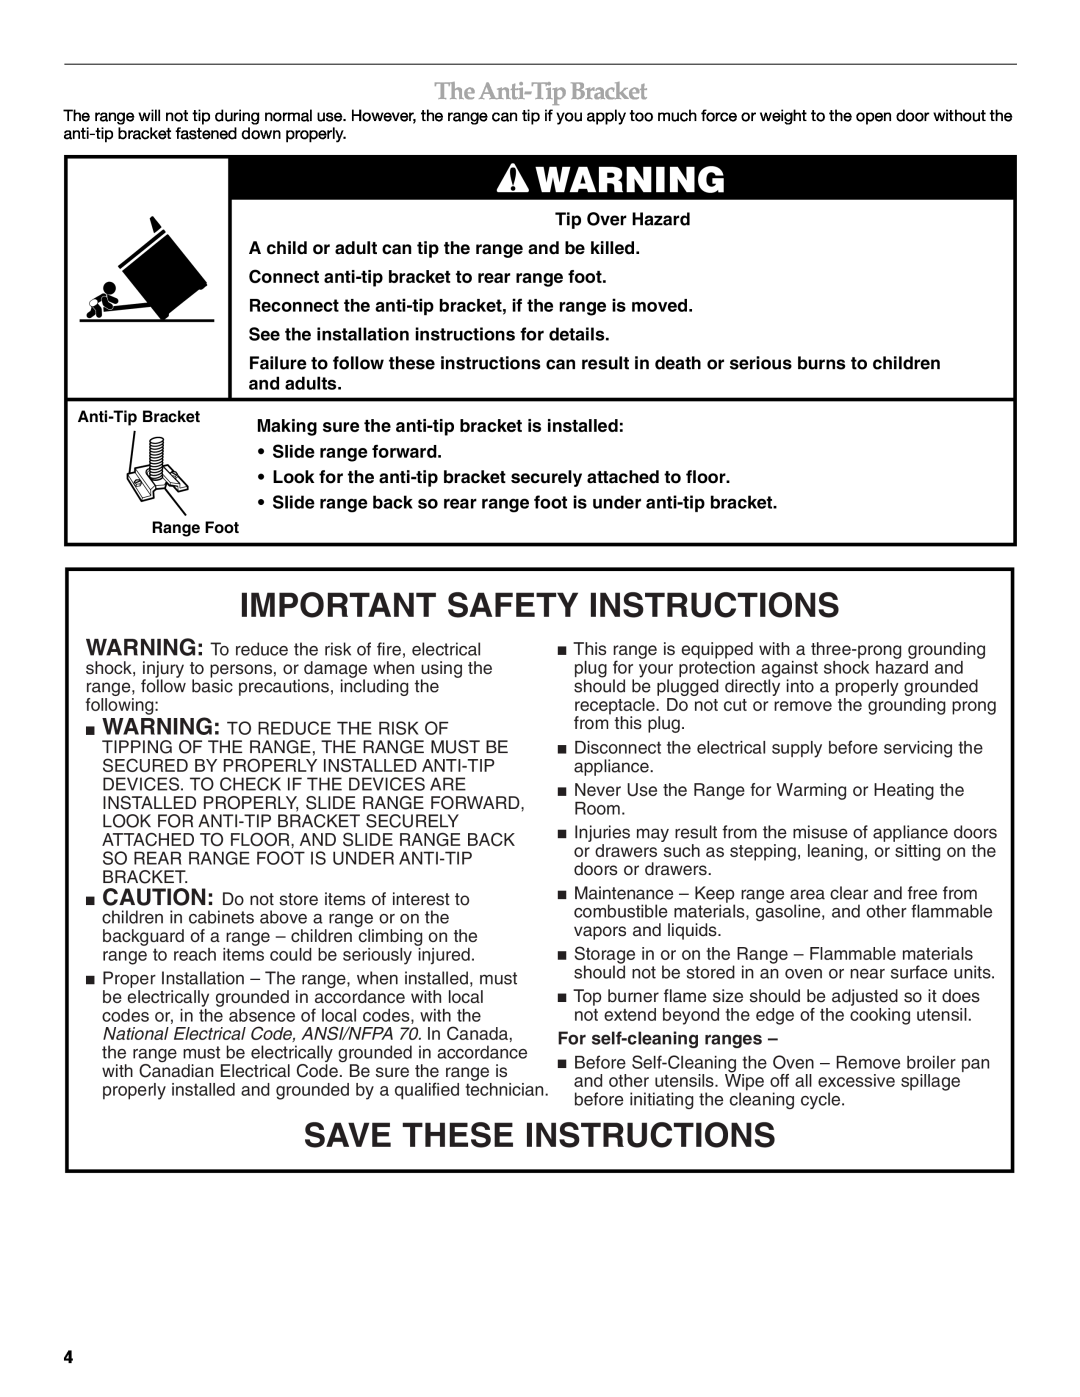 KitchenAid KGRI801 Important Safety Instructions, Save These Instructions, The Anti-Tip Bracket, For self-cleaning ranges 